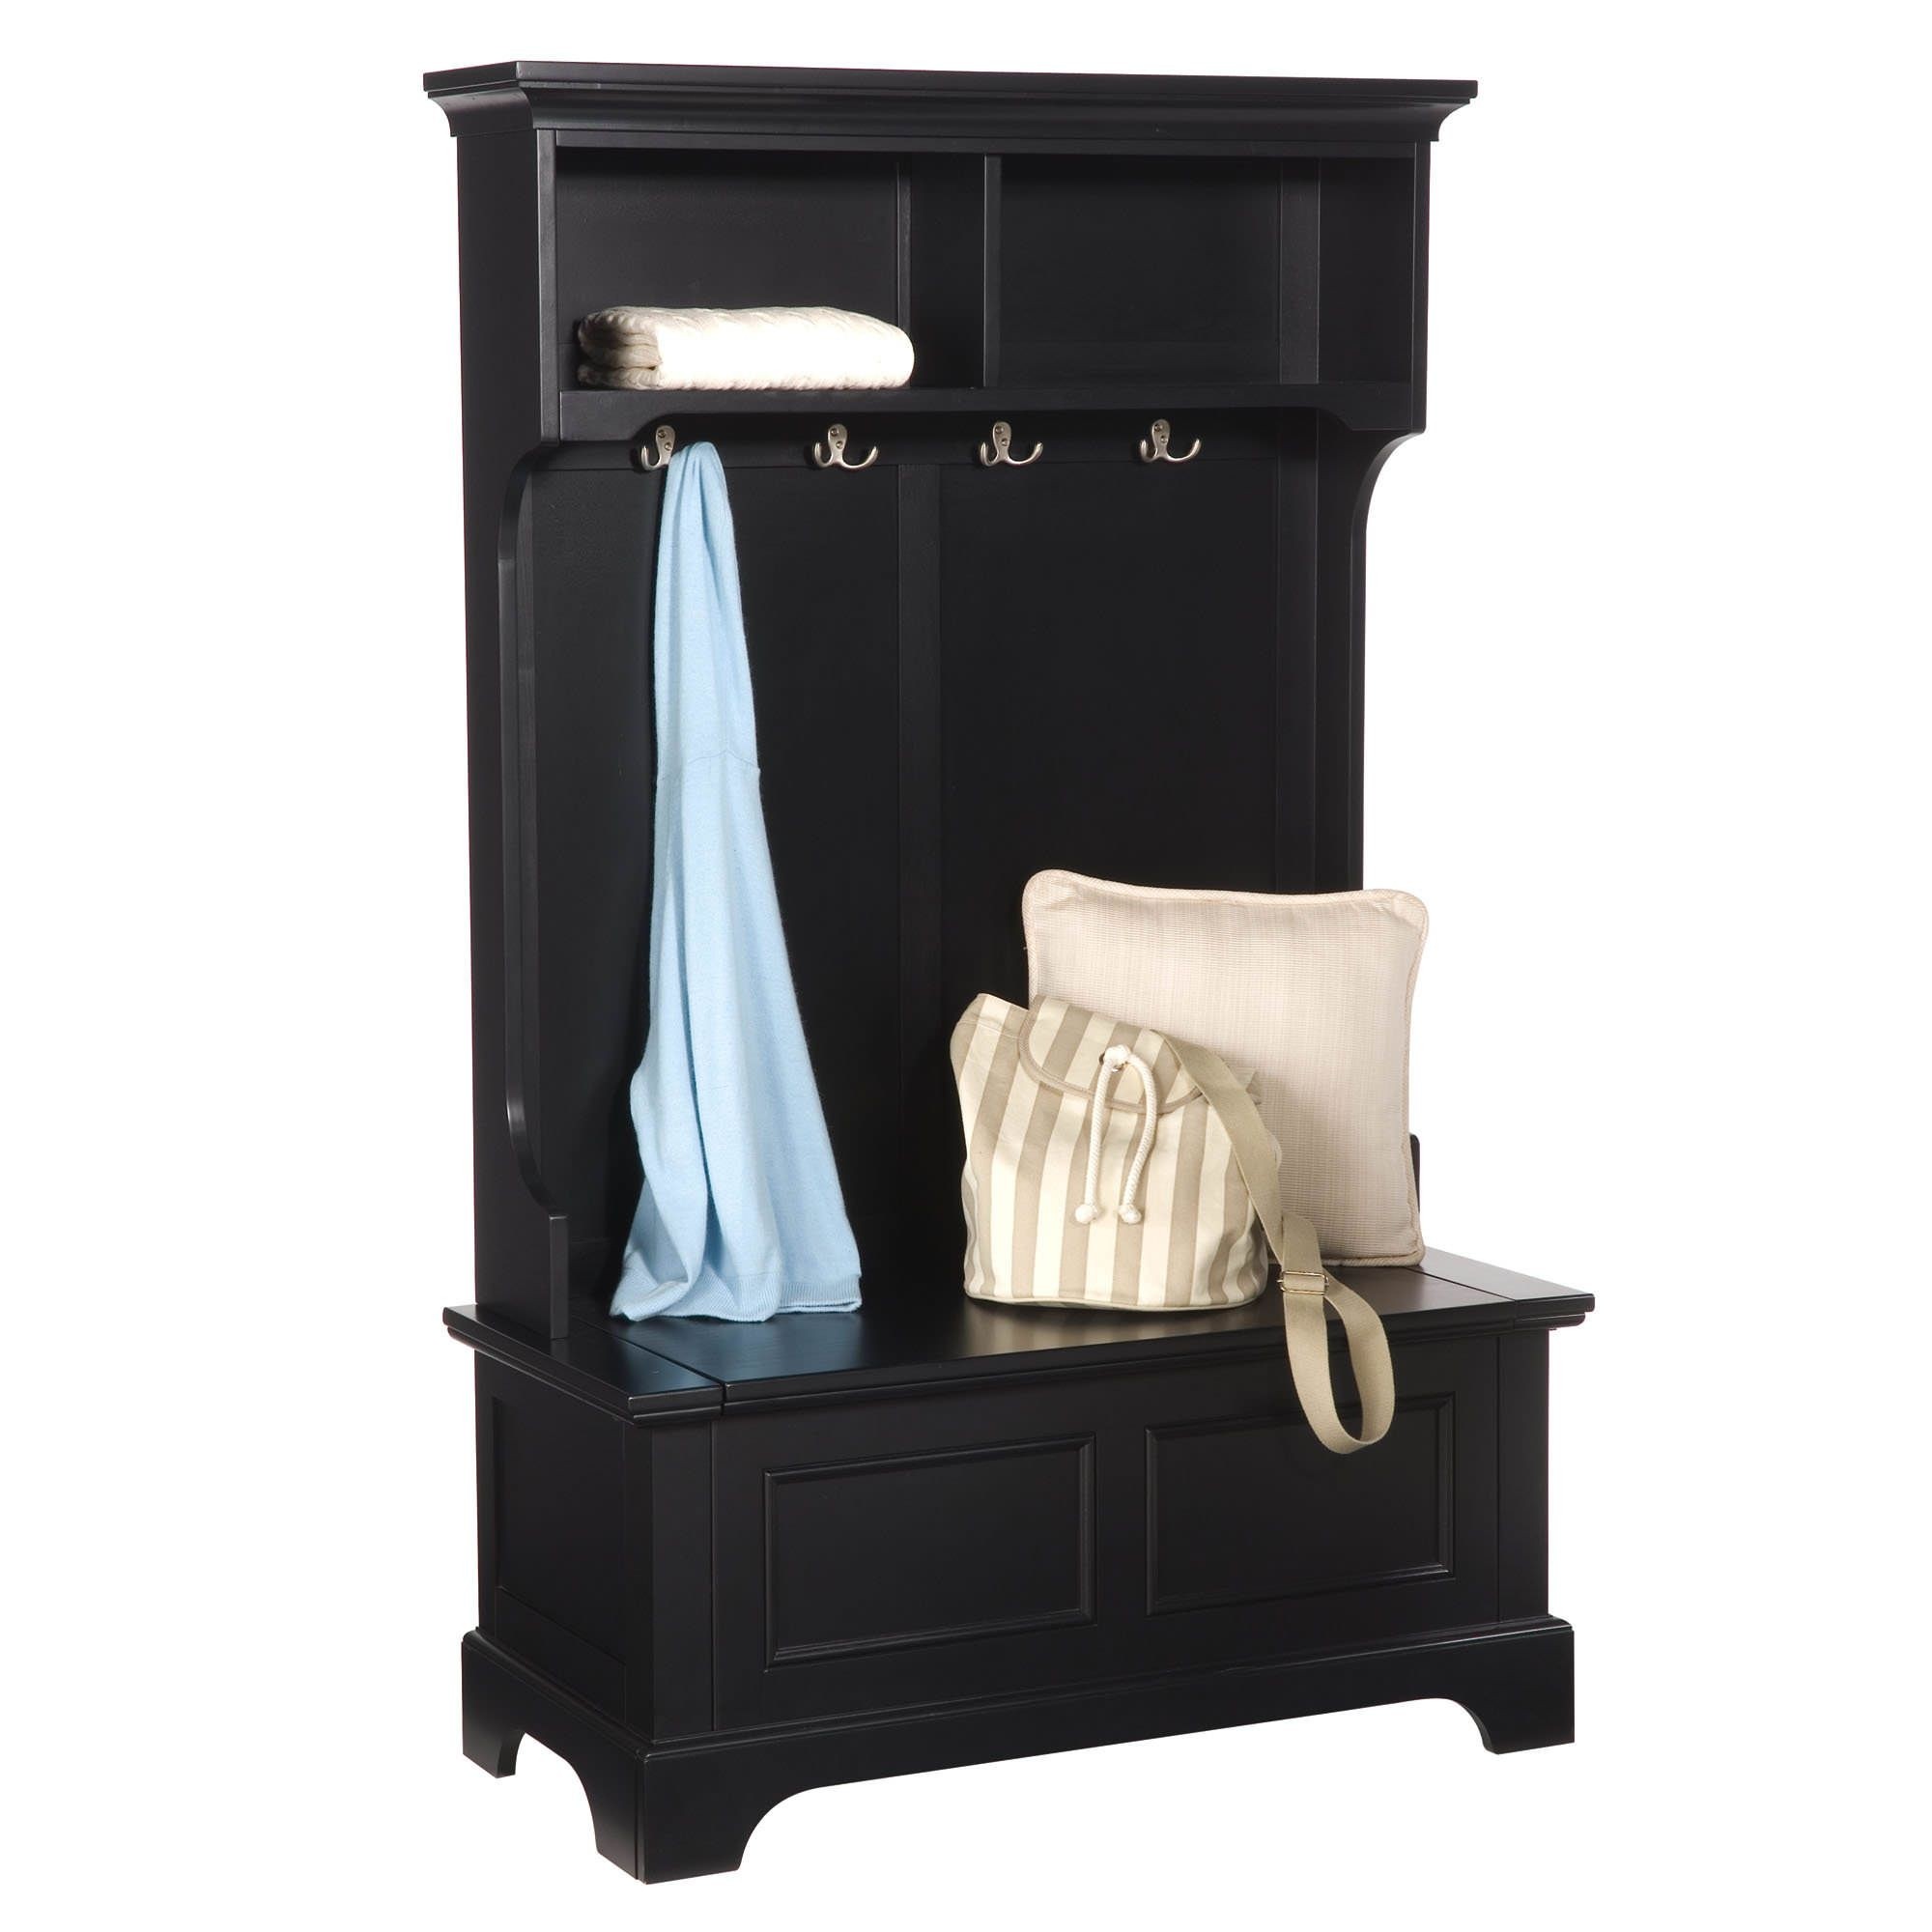 Bedford hall tree in black finish by home styles